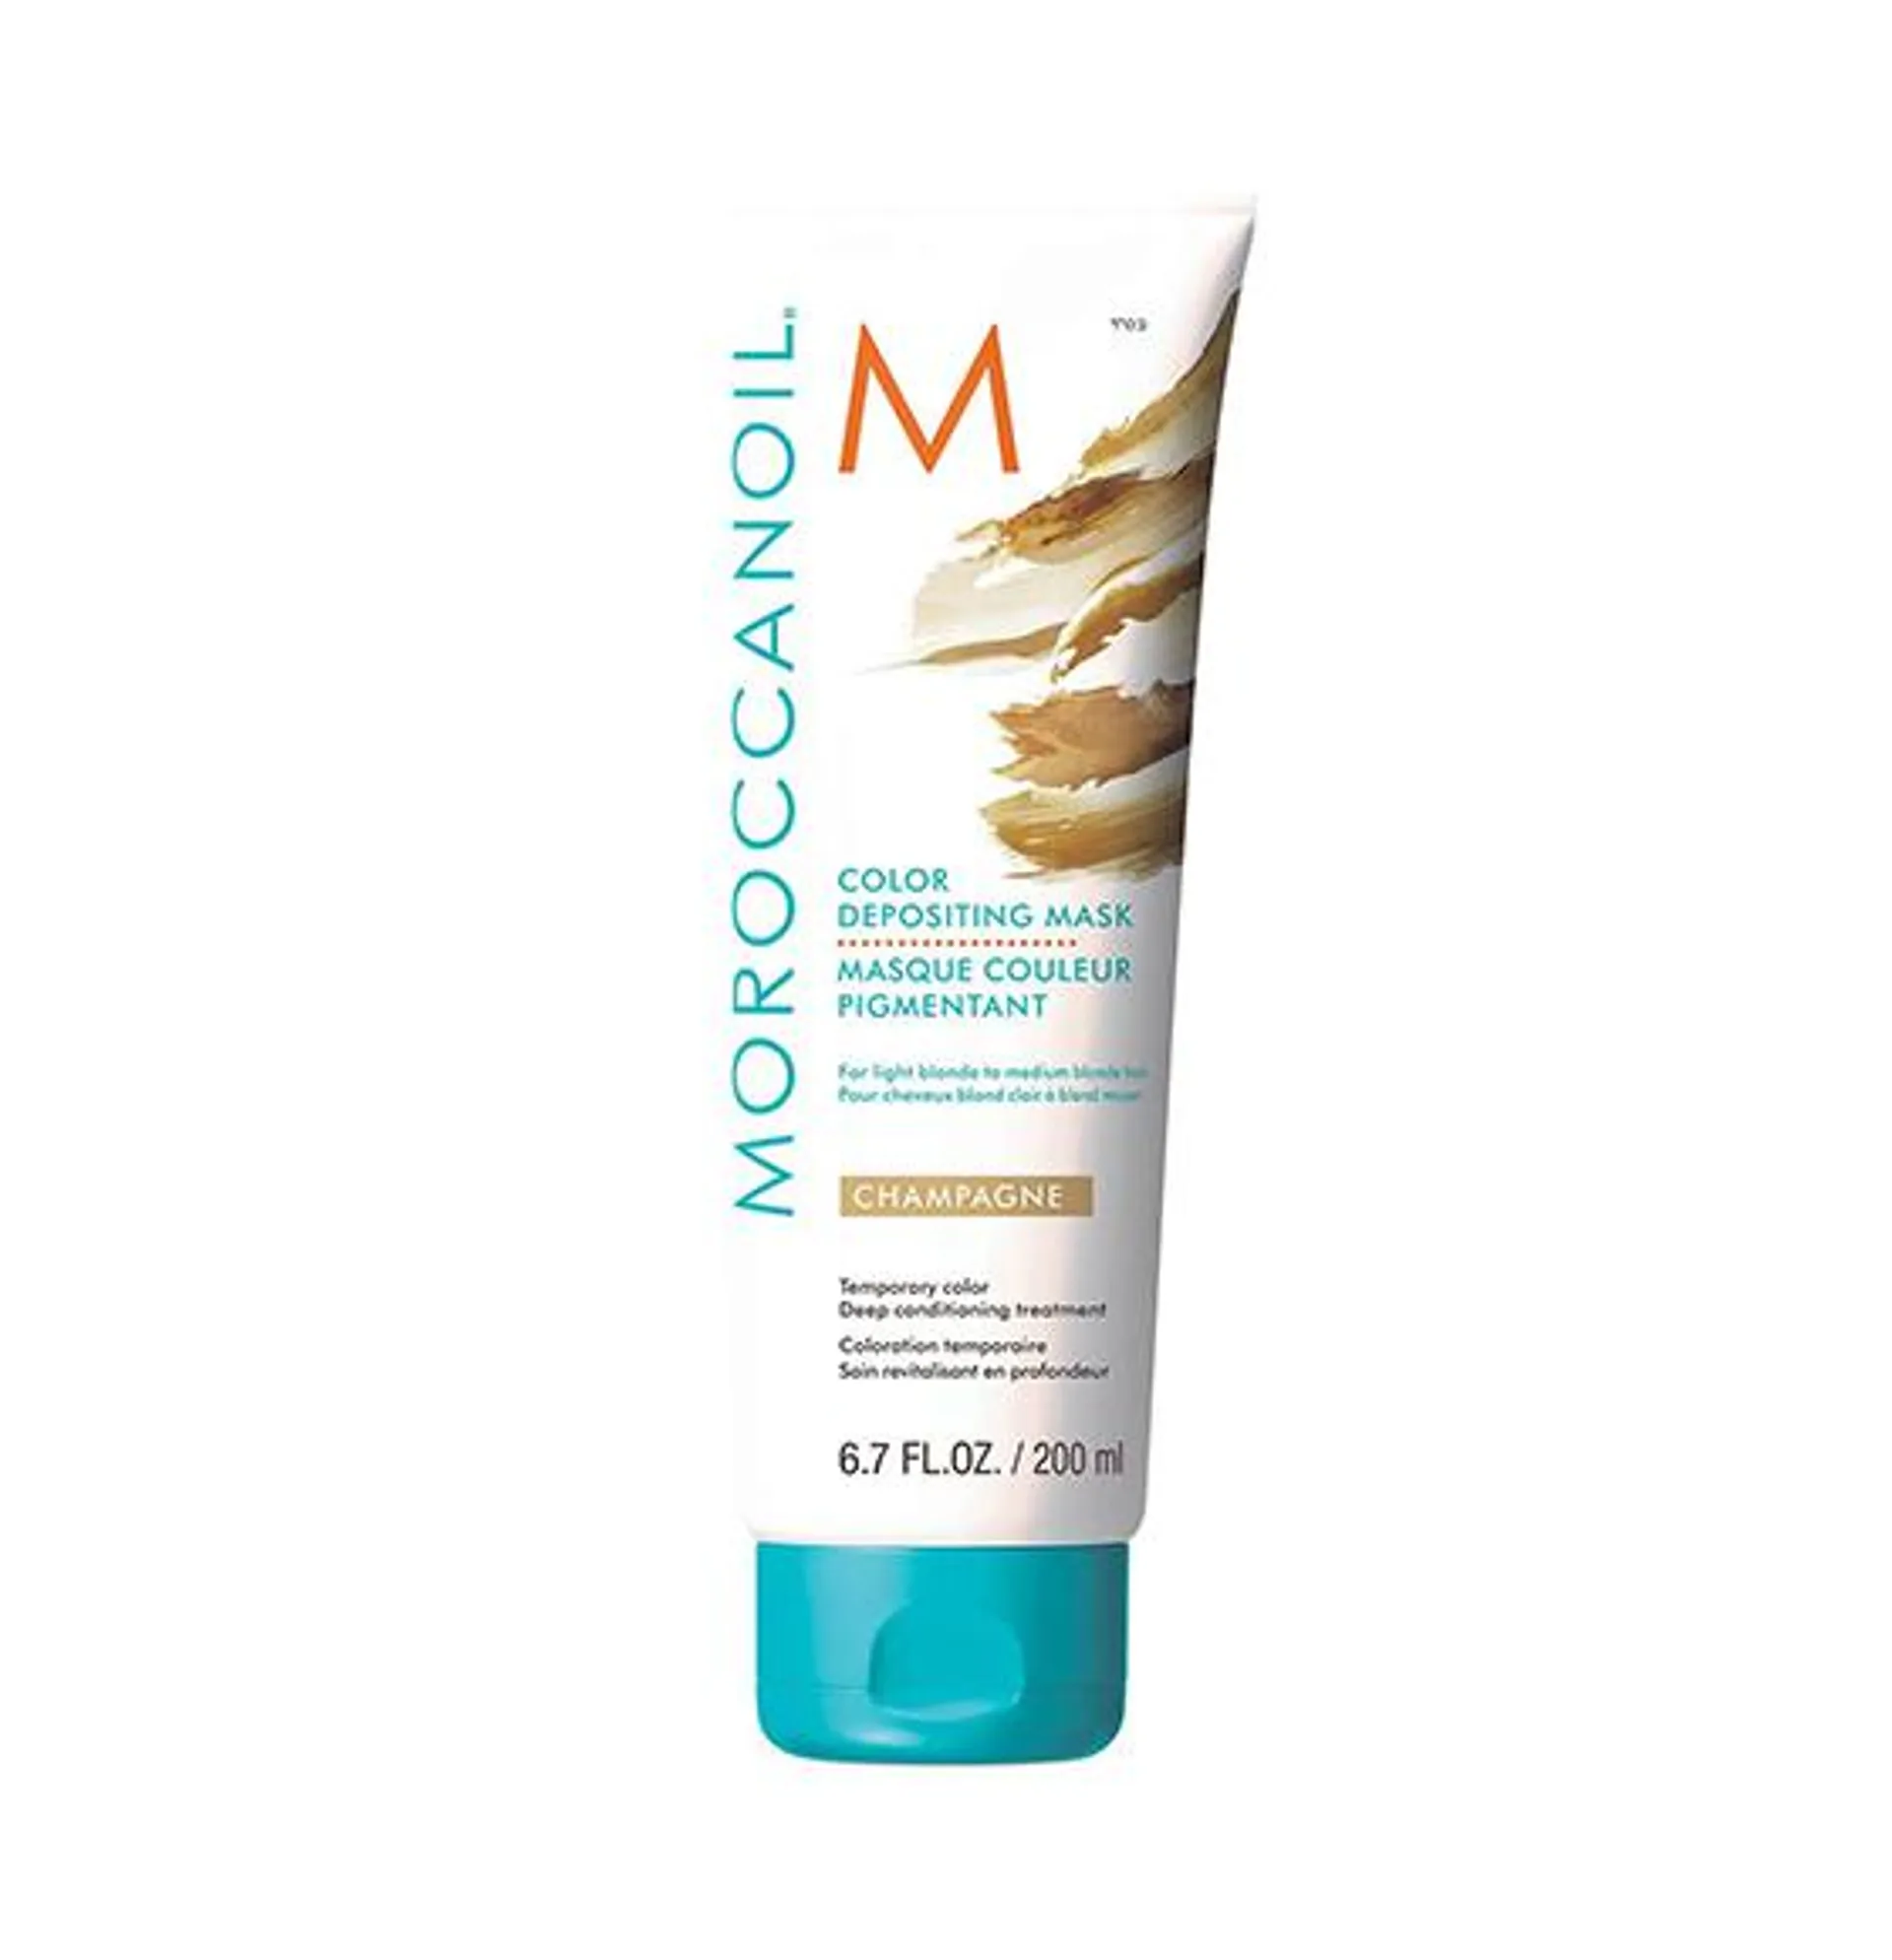 Moroccanoil Color Depositing Mask - Champagne